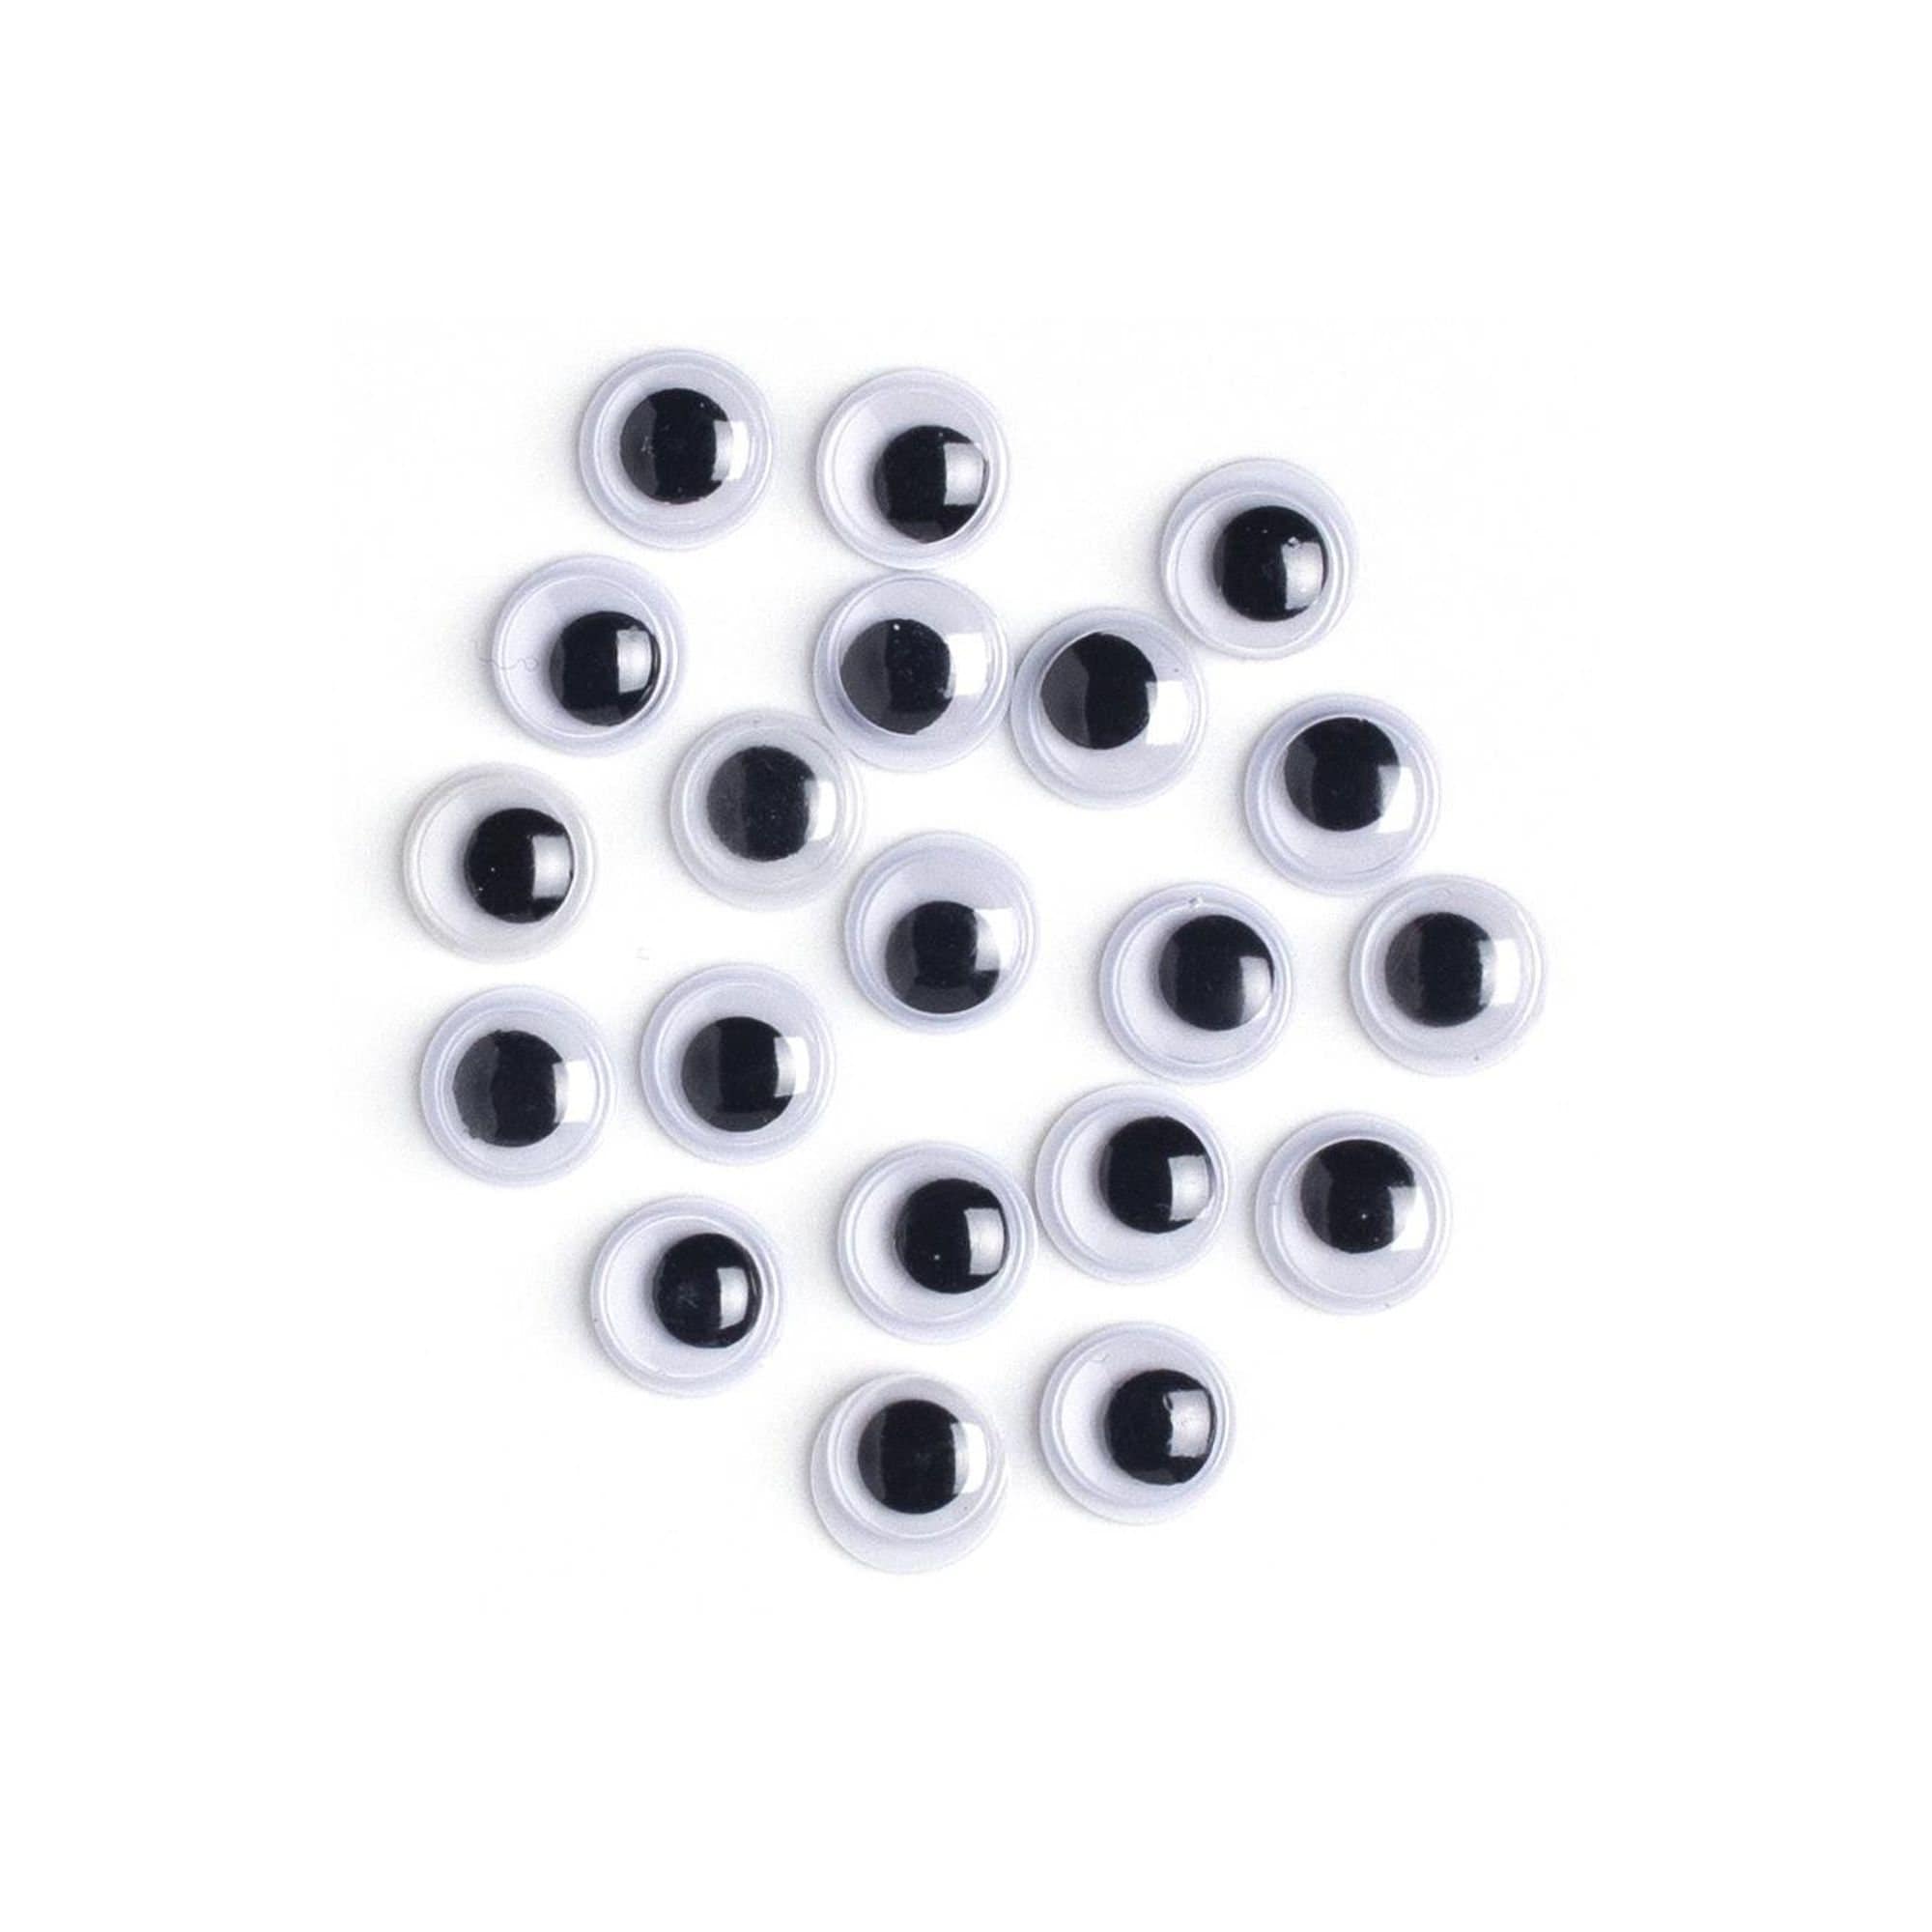 1,000 Pieces Movable Wiggle Googly Eyes 6mm Yellow for Crafts Dolls Puppets  Animals Insects 